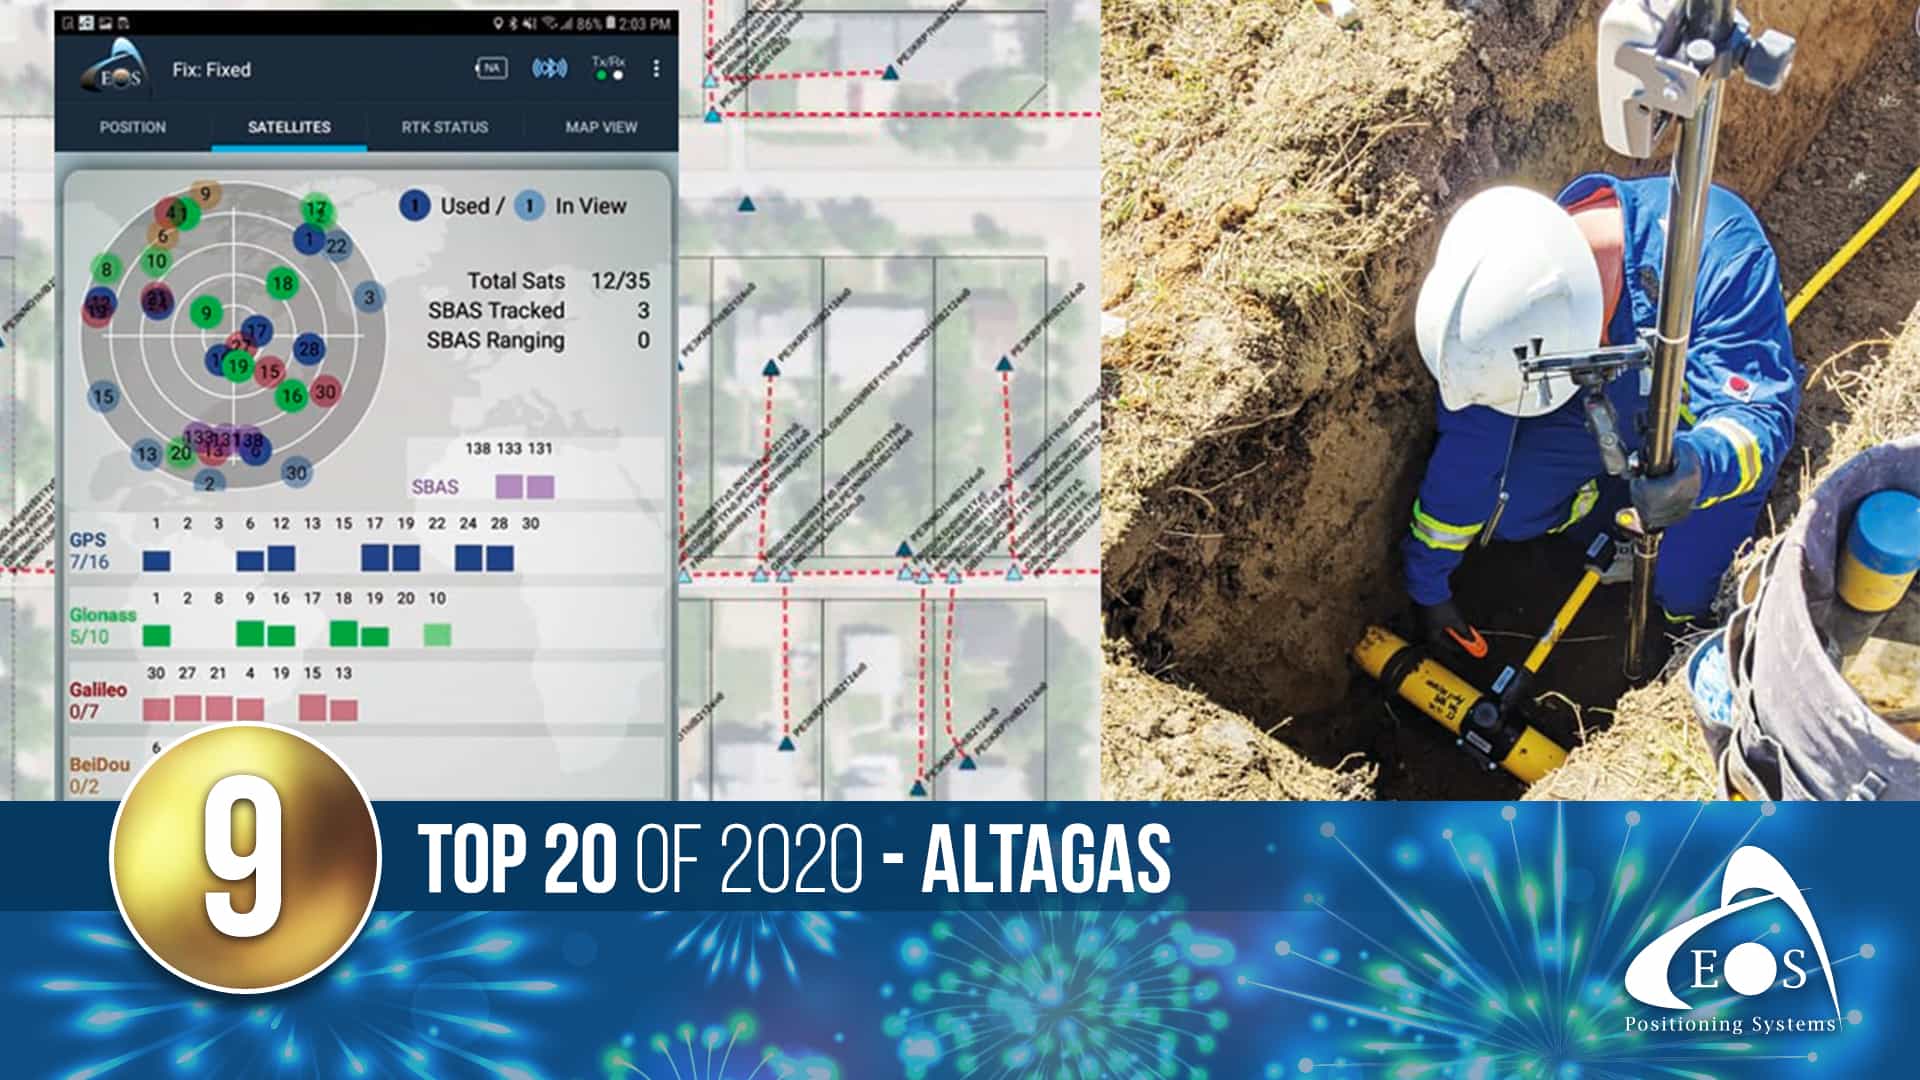 Eos Positioning Systems blog top articles of 2020: 9 - AltaGas